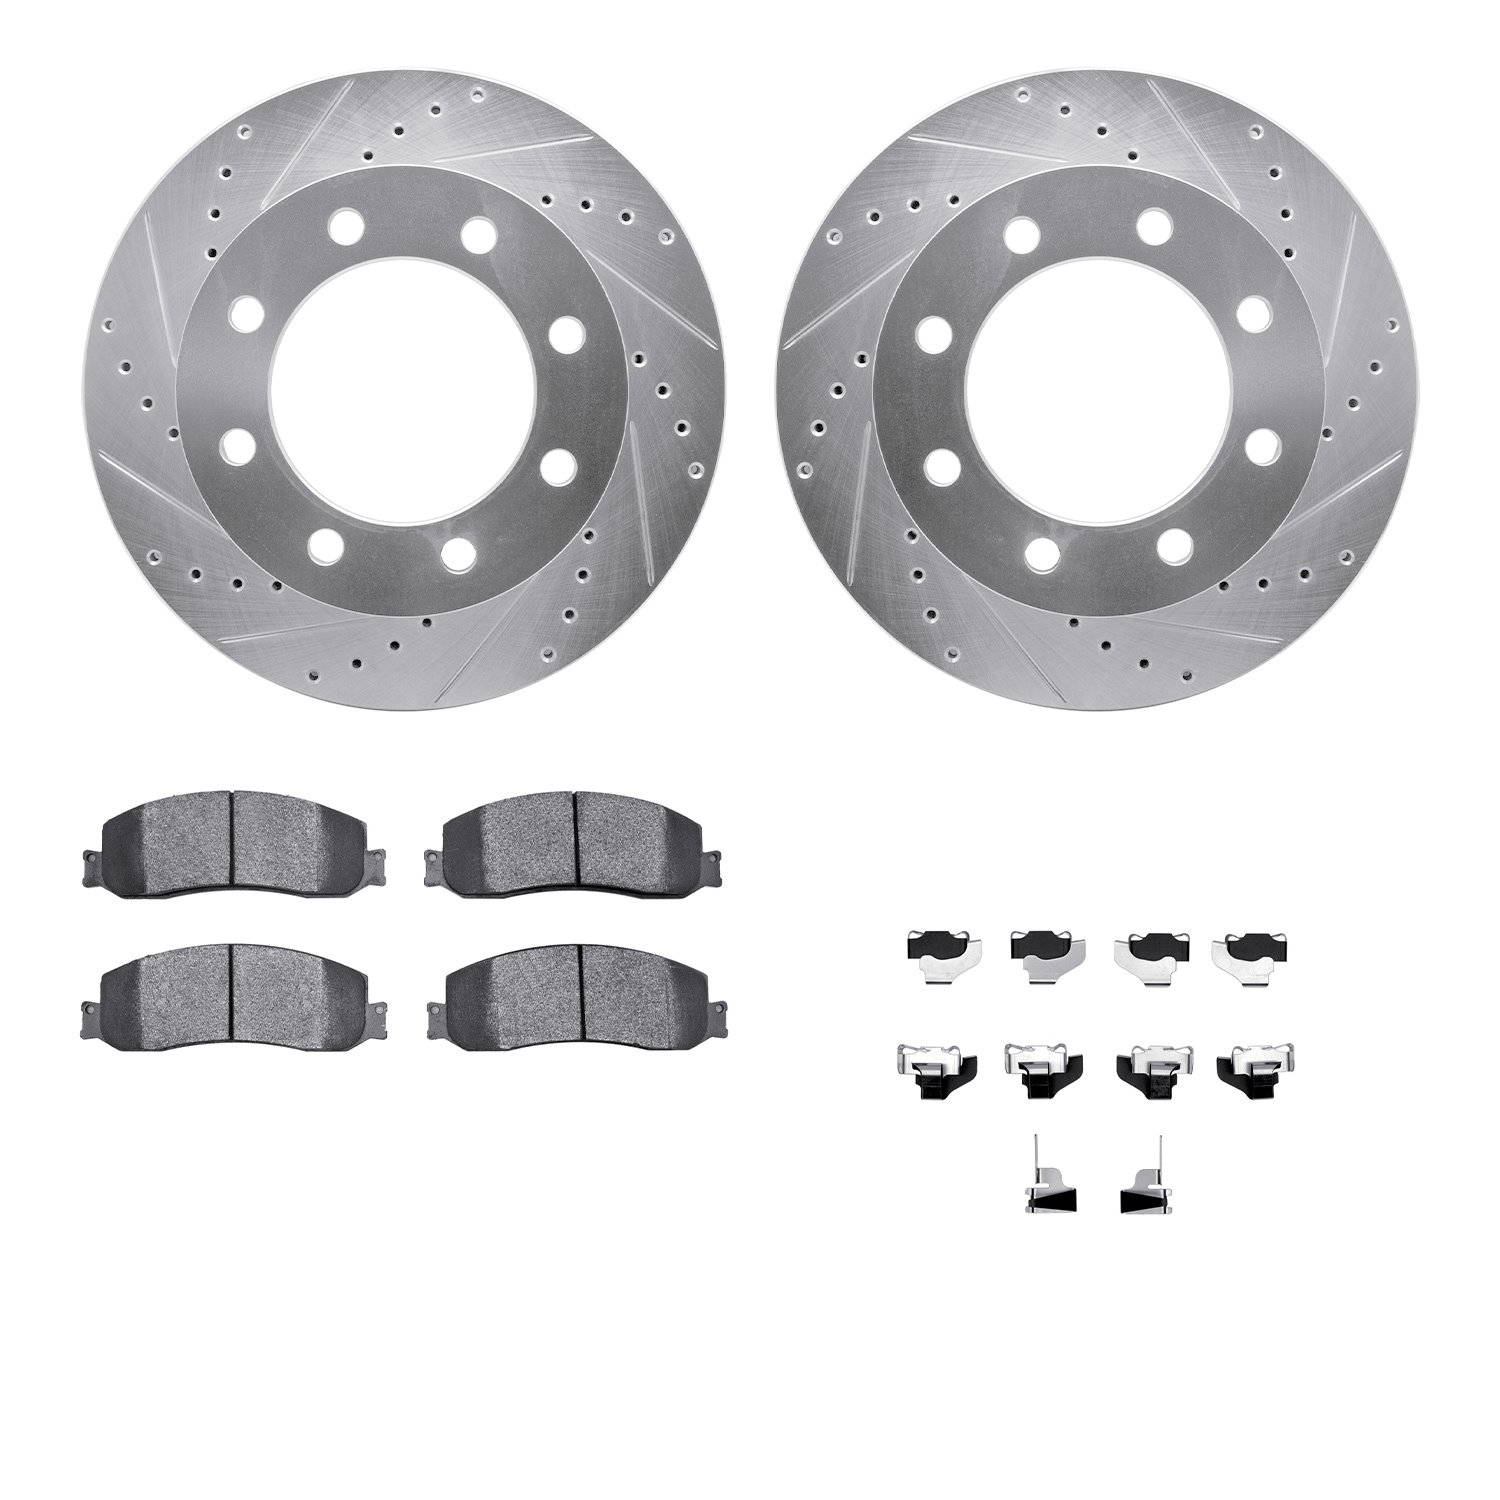 7412-54082 Drilled/Slotted Brake Rotors with Ultimate-Duty Brake Pads Kit & Hardware [Silver], 2010-2012 Ford/Lincoln/Mercury/Ma